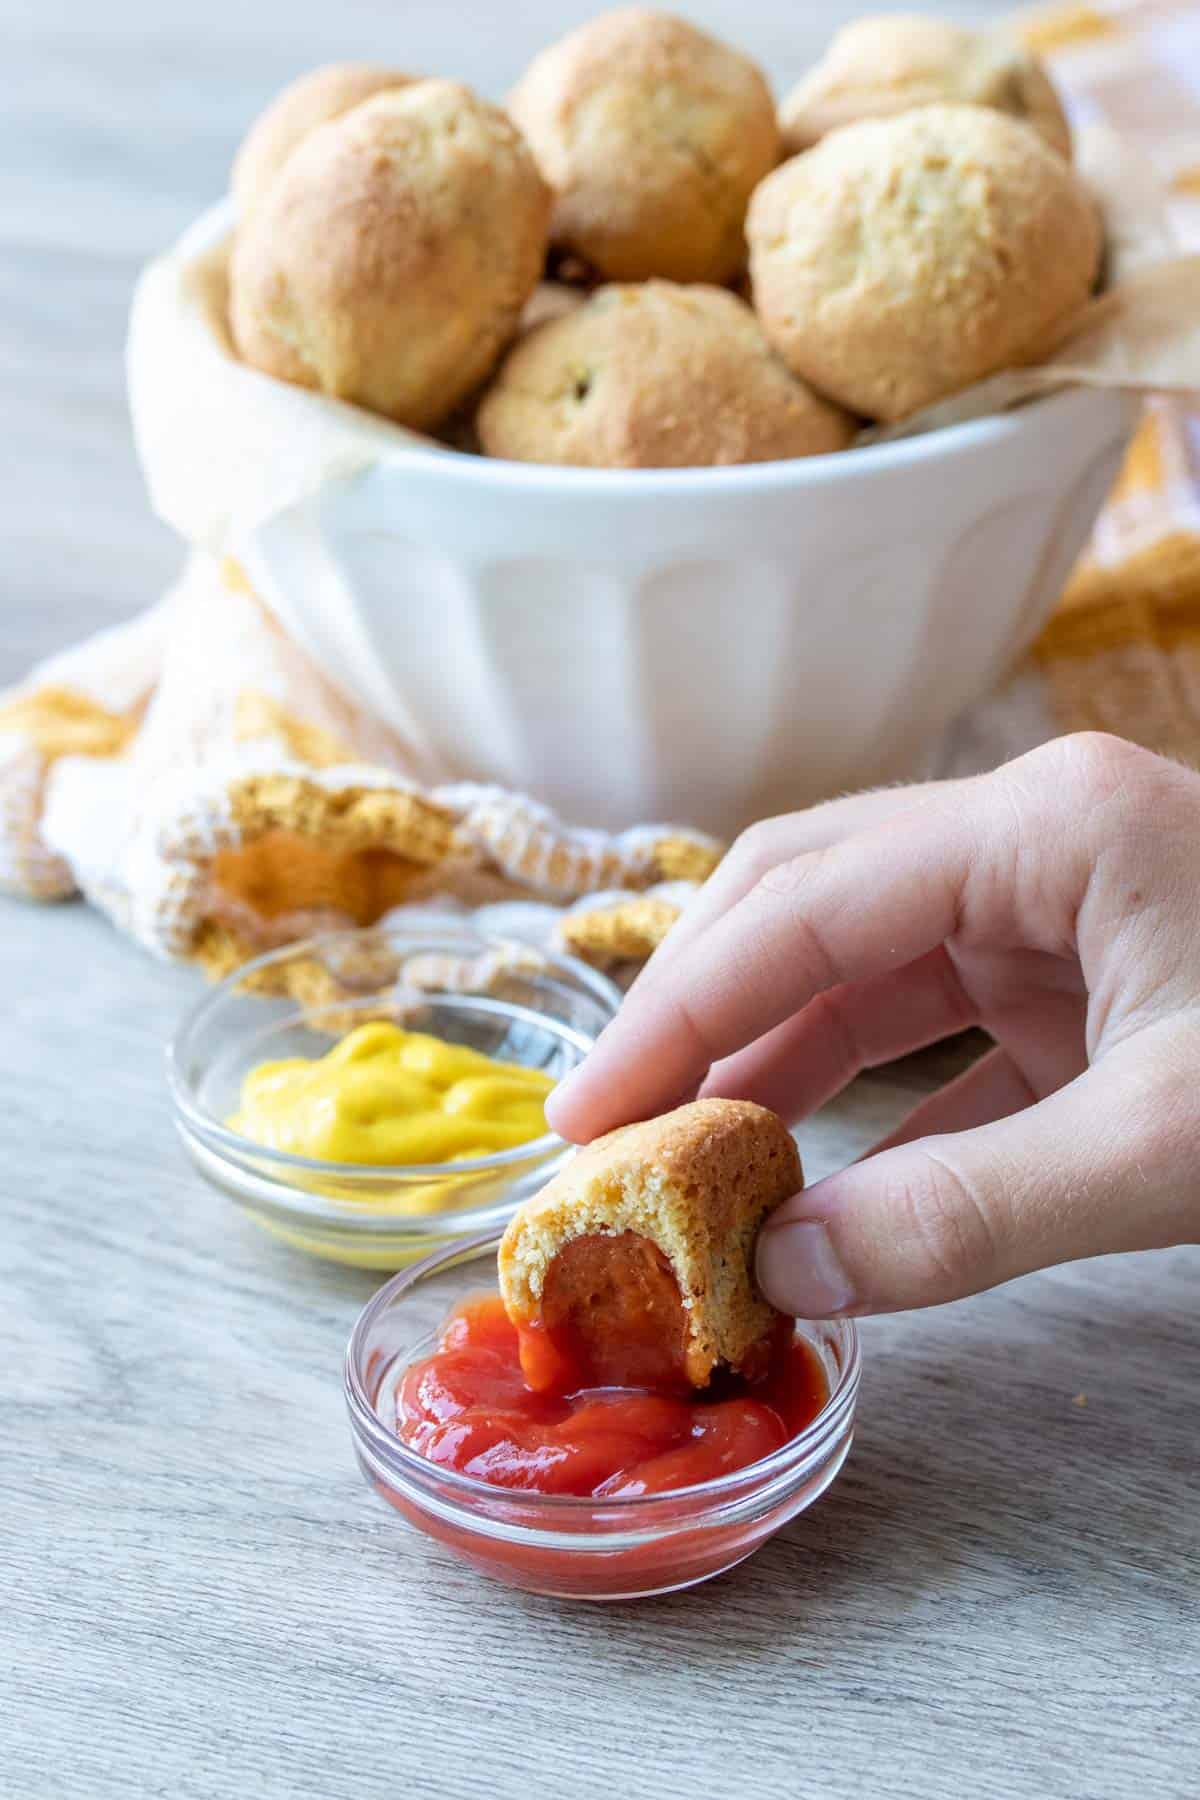 Hand dipping a corn dog with a bite into ketchup